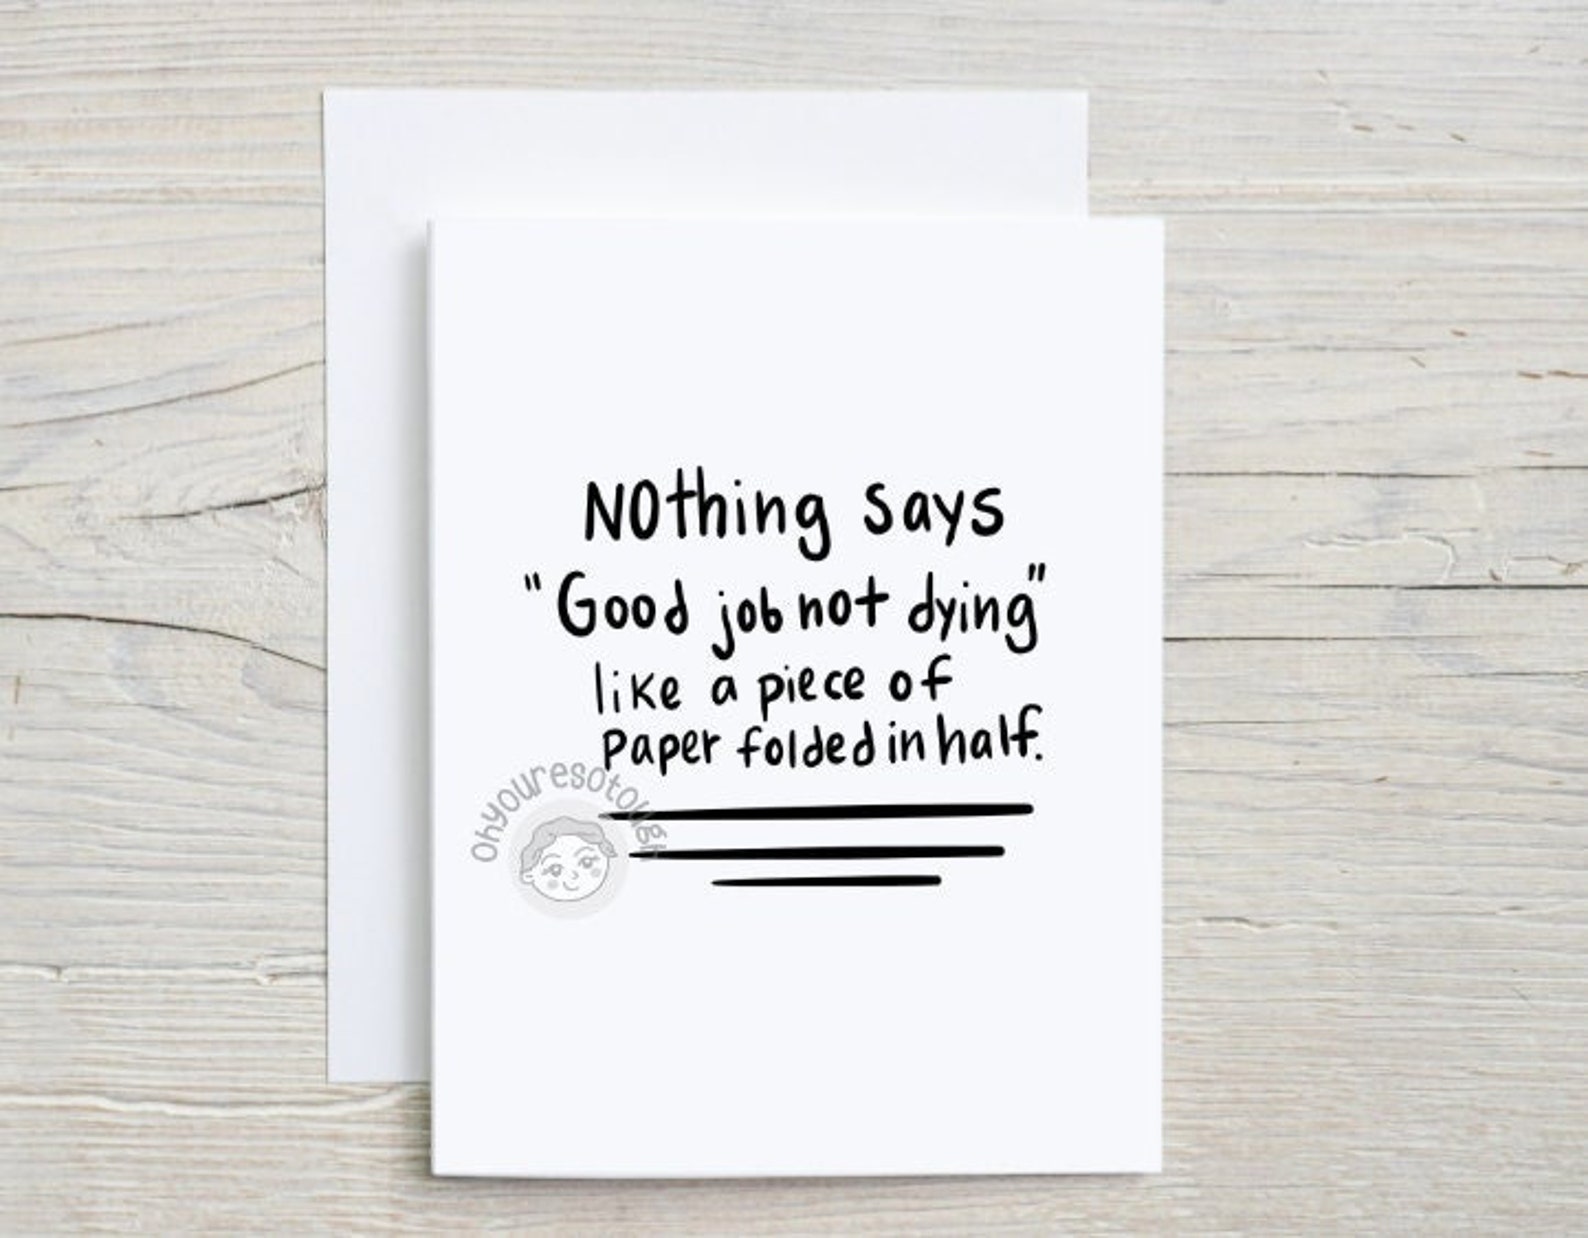 End of Chemo Card Funny - Good Job Not Dying Card - Cancer Card - Chemo Card - Funny Cancer Gift - Cancer Survivor - Cancer Support Card